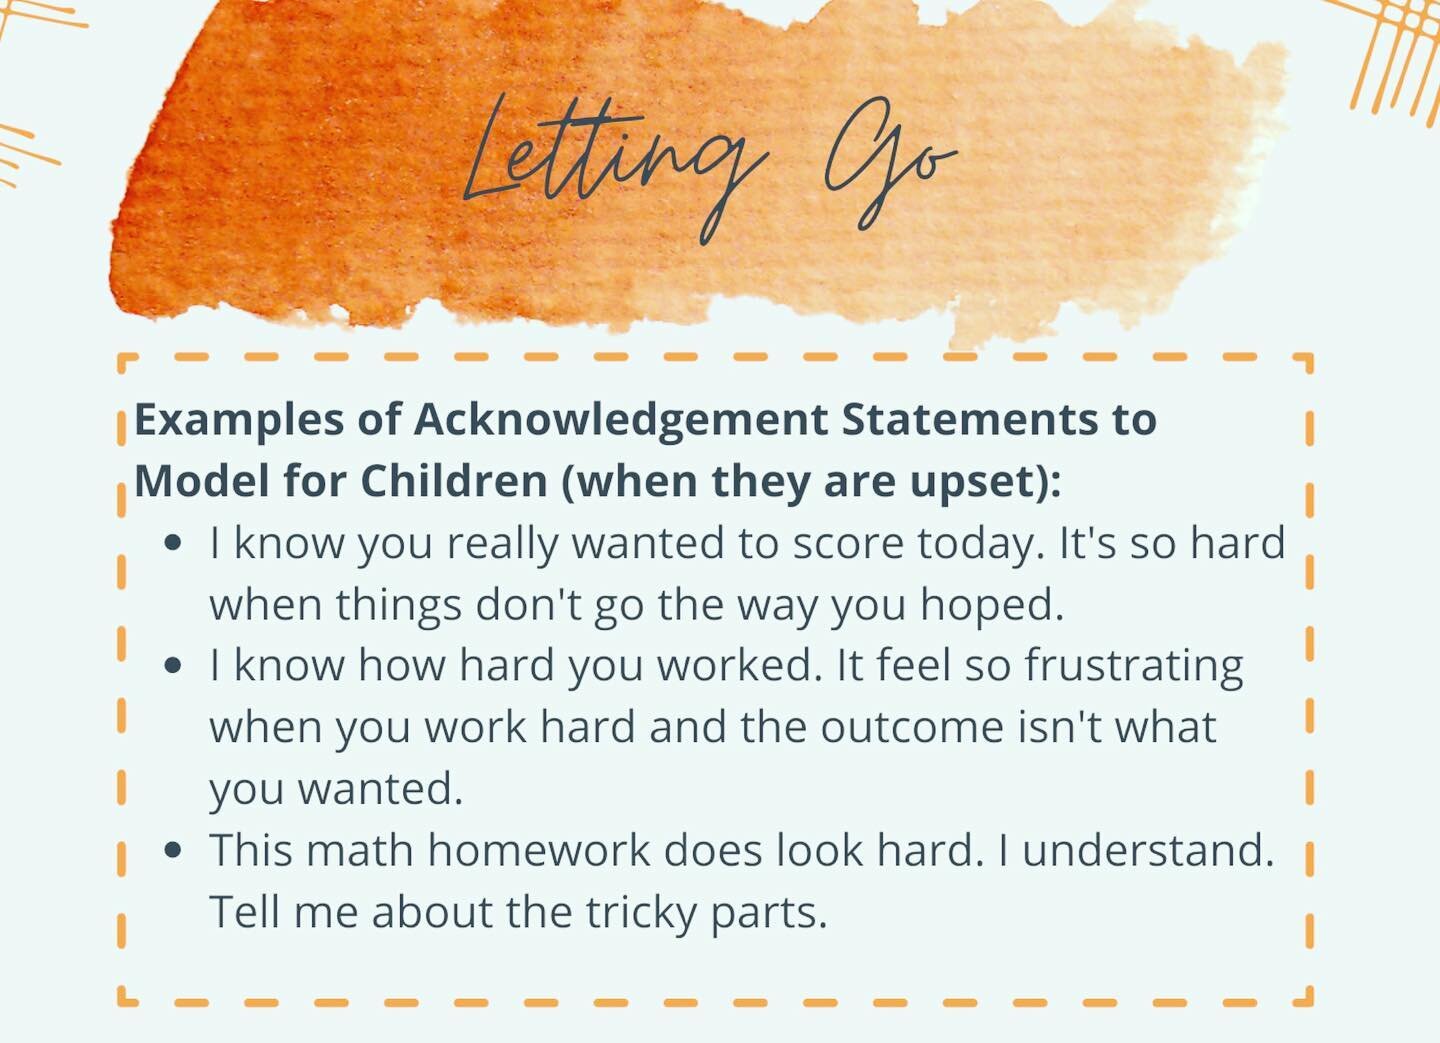 Do you want to help your kids learn how to let go and move forward? 

There are a few steps that kids (parents and educators) can work on to help them towards this goal. 

Main Ideas:
✨Letting go first requires that we adequately acknowledge and acce